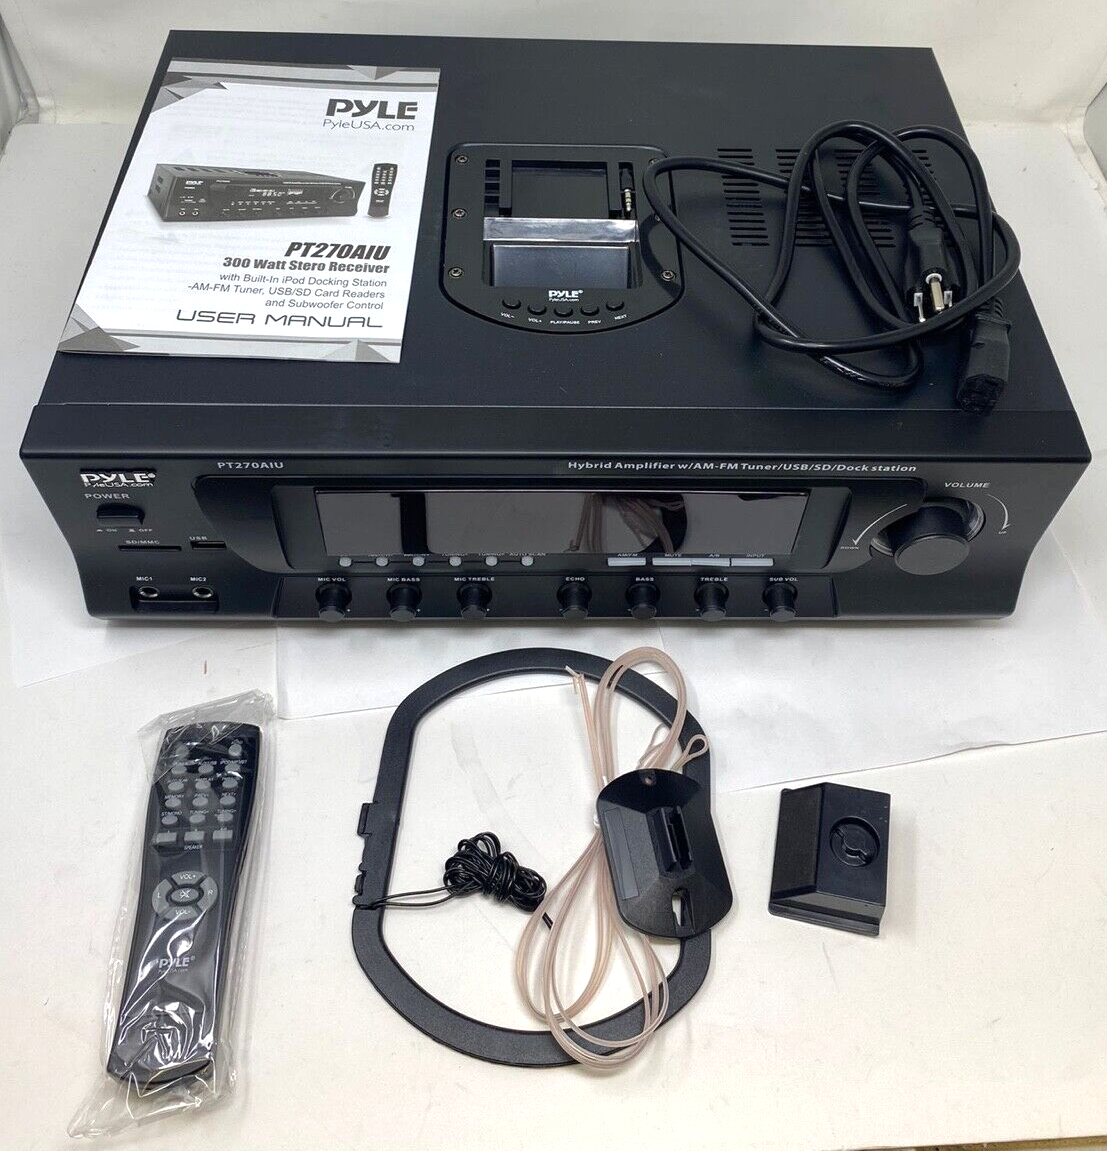 Pyle Pro Home Amplifier Receiver Stereo AM FM USB SD Subwoofer Control 300W OEM